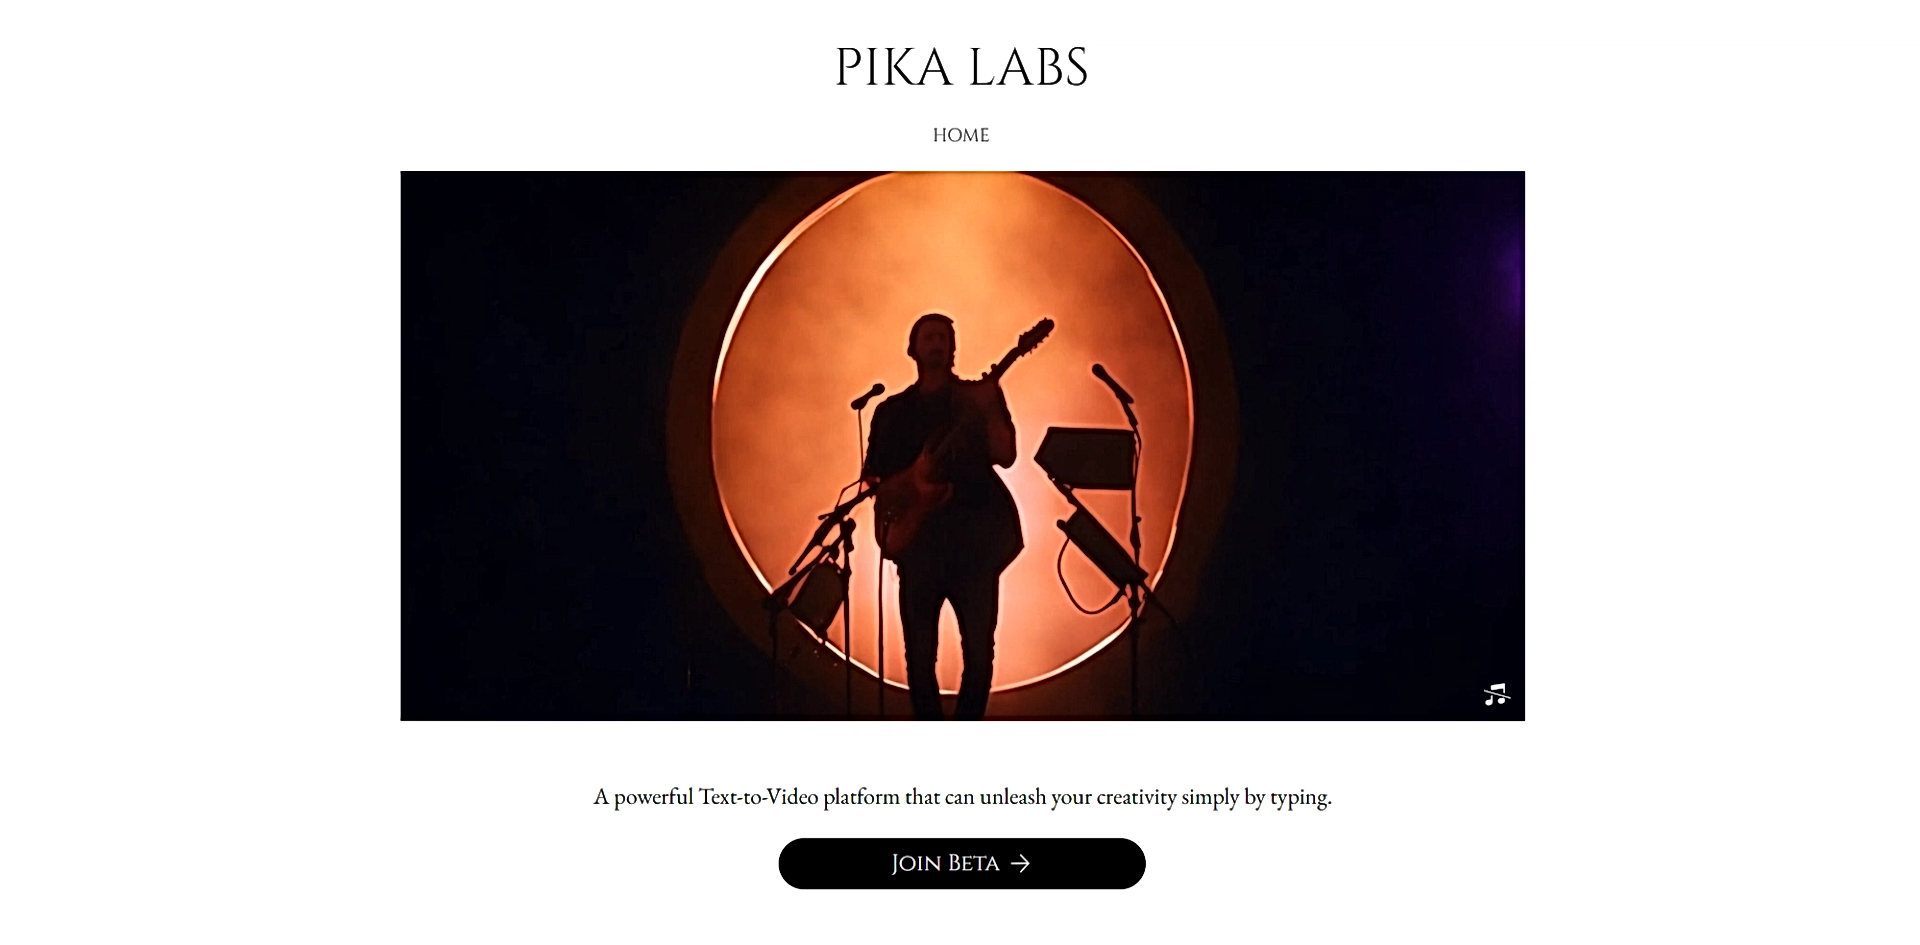 Pika Labs featured